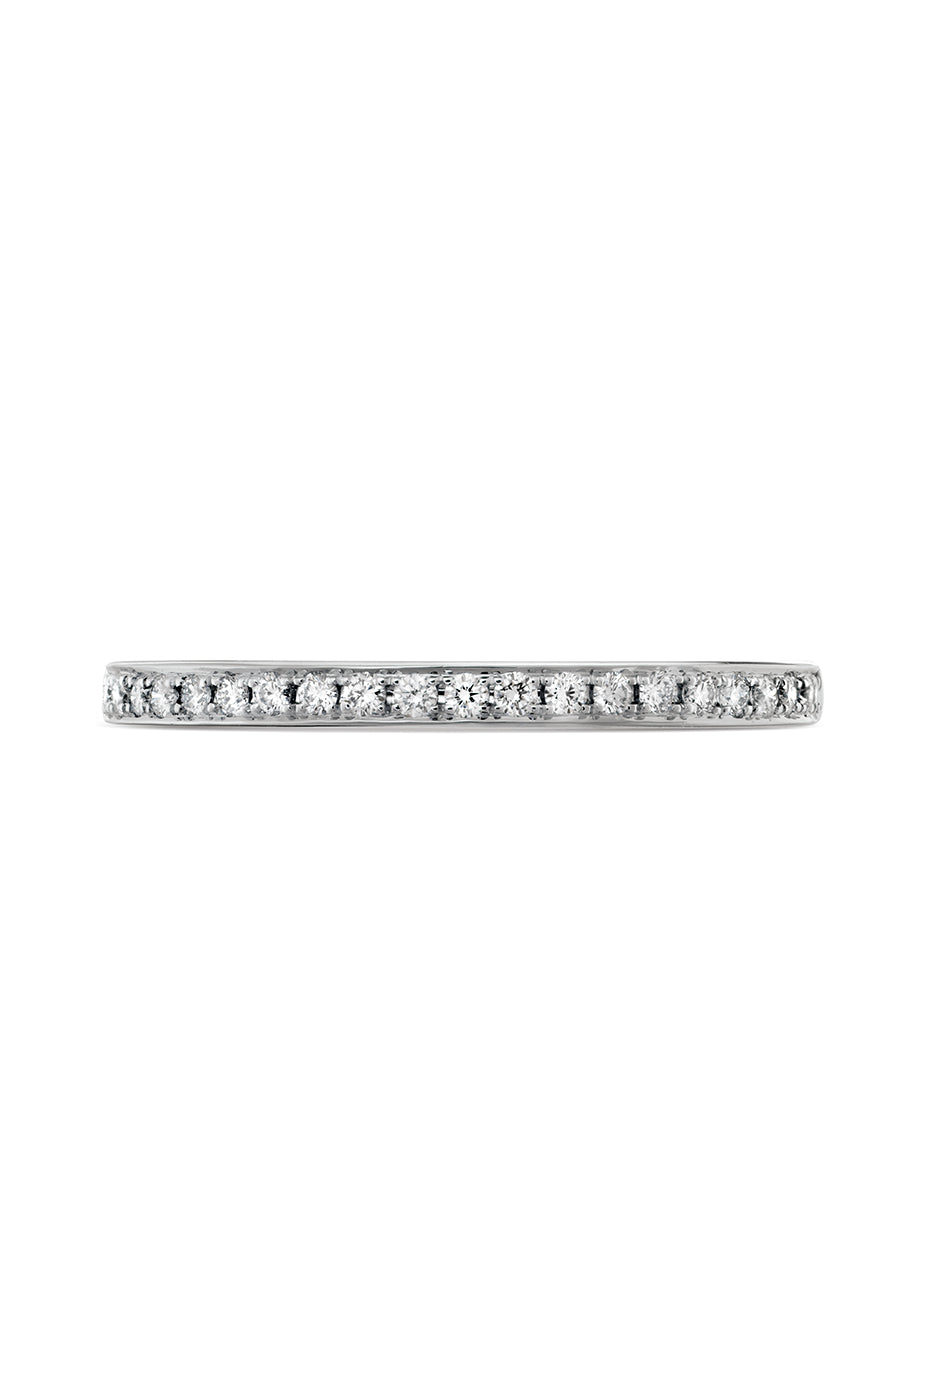 Signature Diamond Band From Hearts On Fire available at LeGassick Diamonds and Jewellery Gold Coast, Australia.